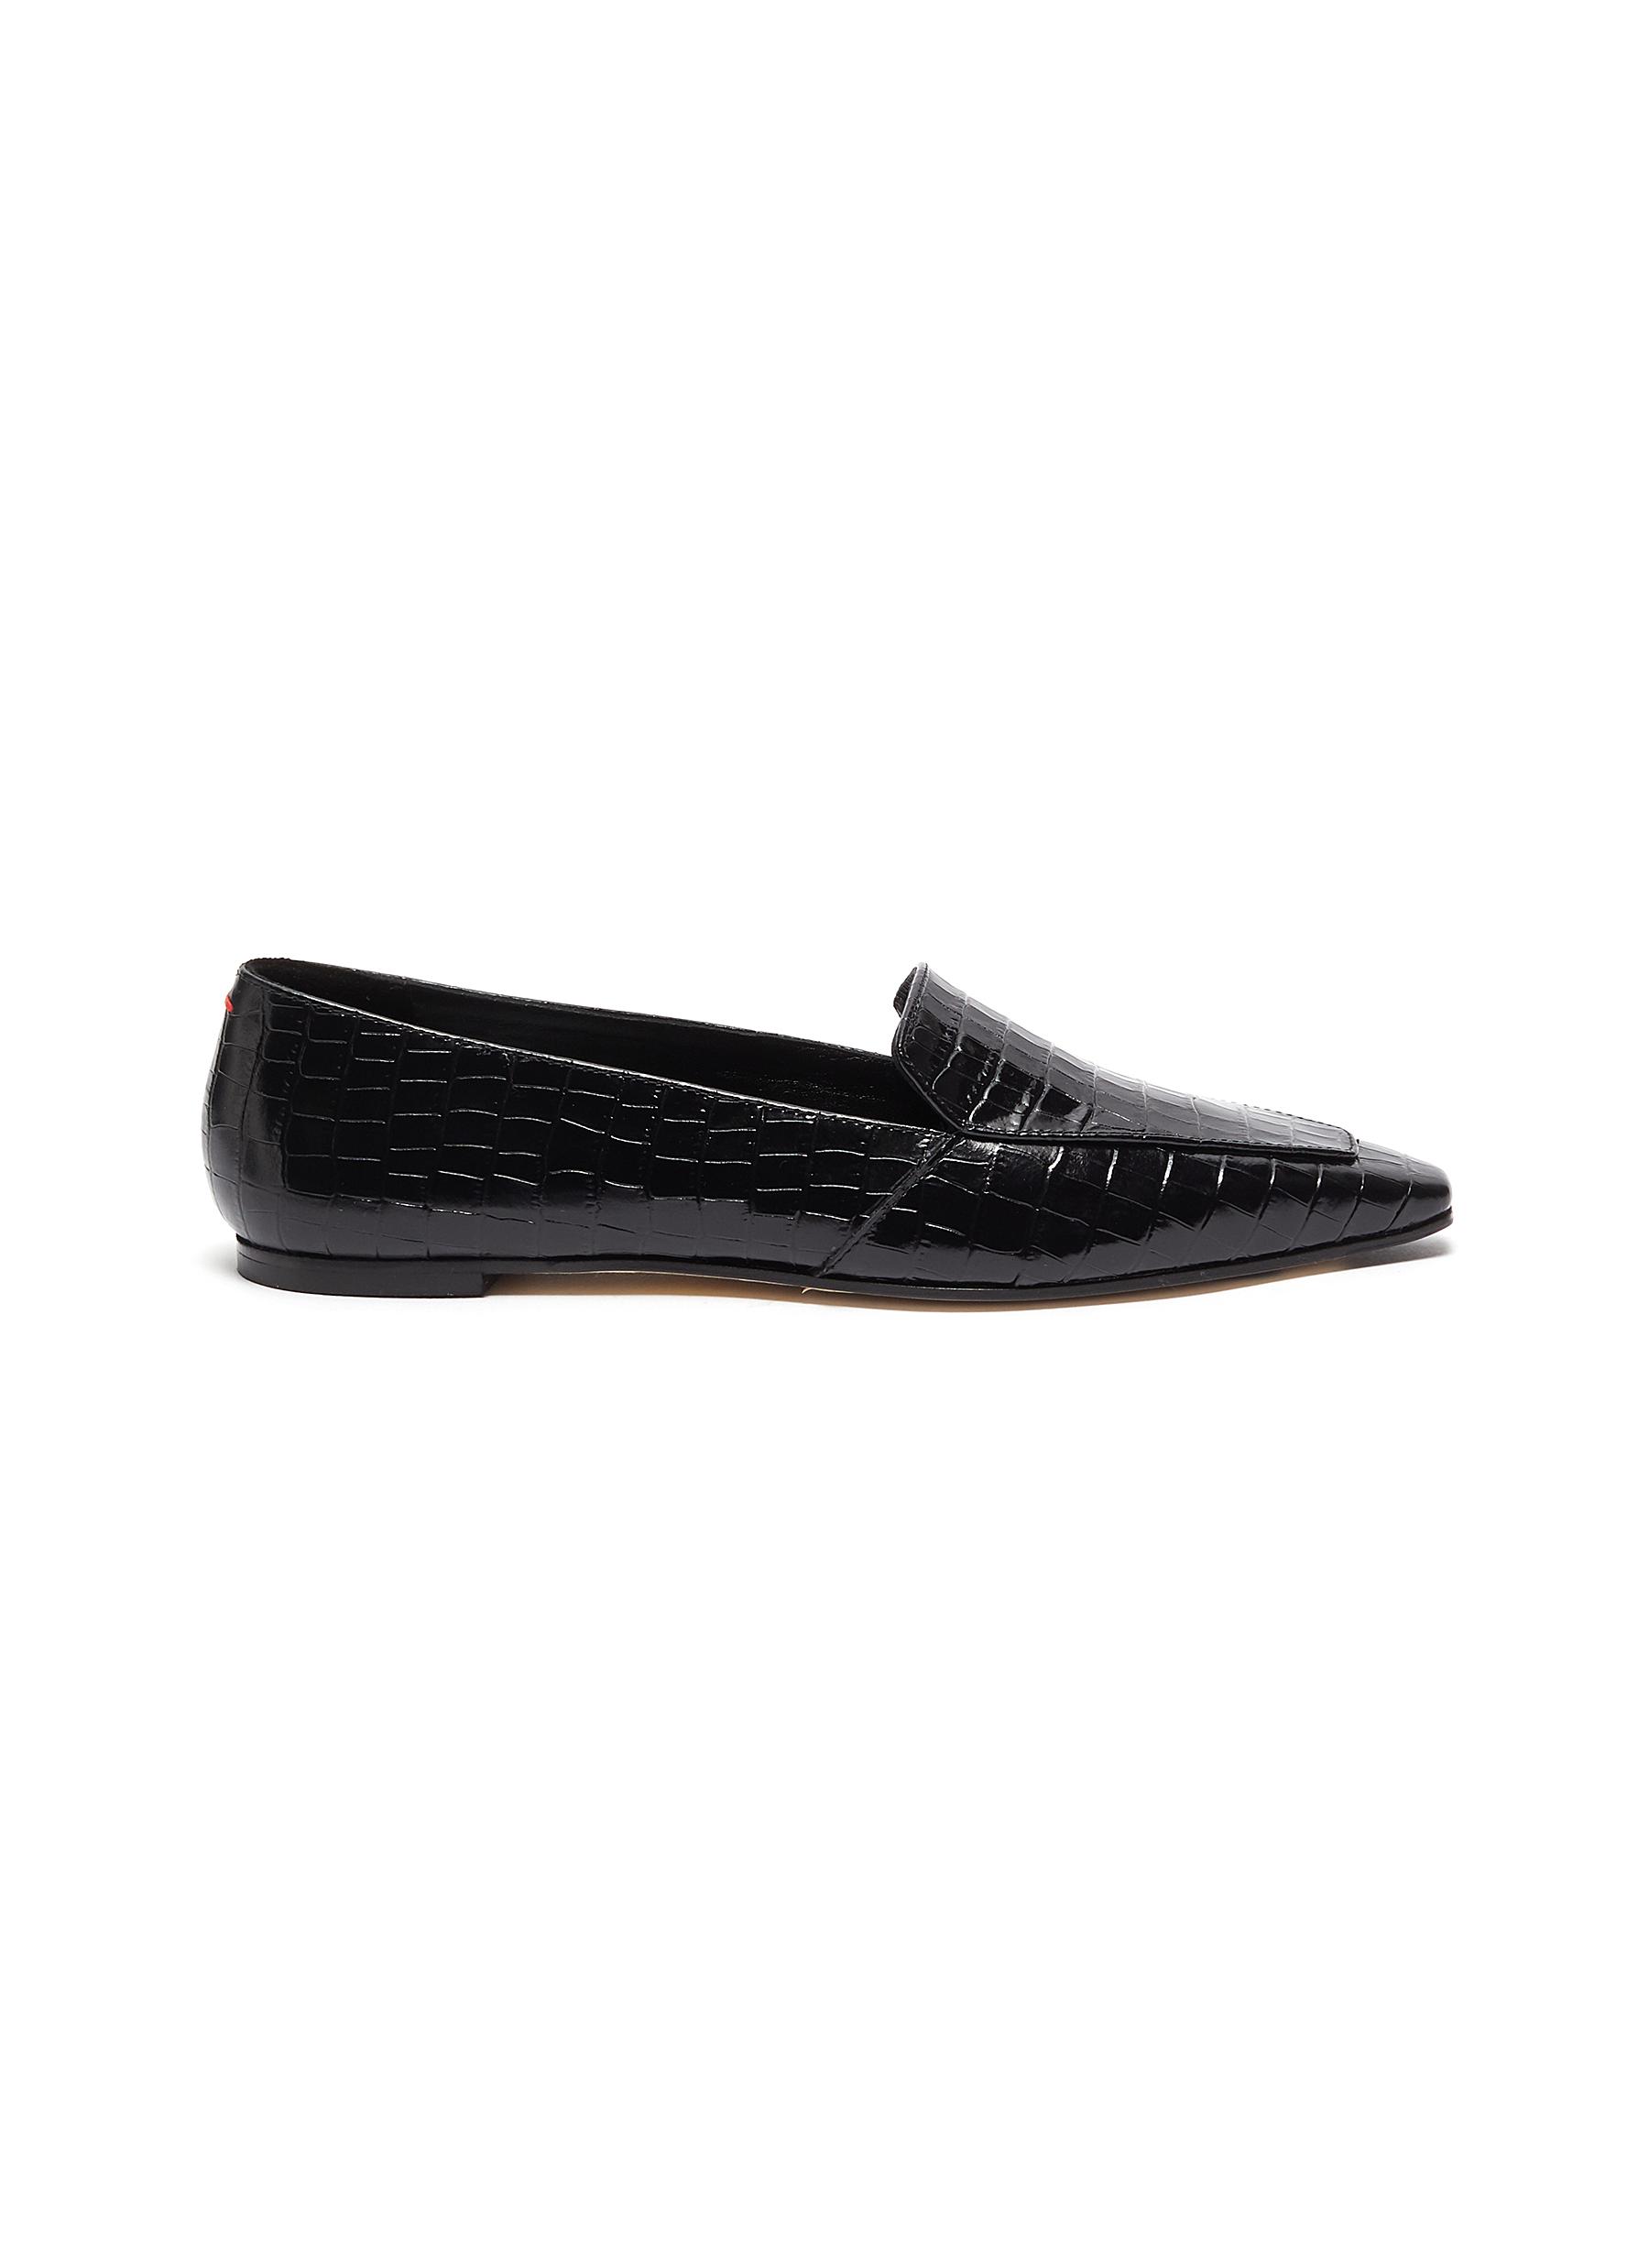 Aeyde 'AURORA' CROC EMBOSSED LEATHER LOAFERS